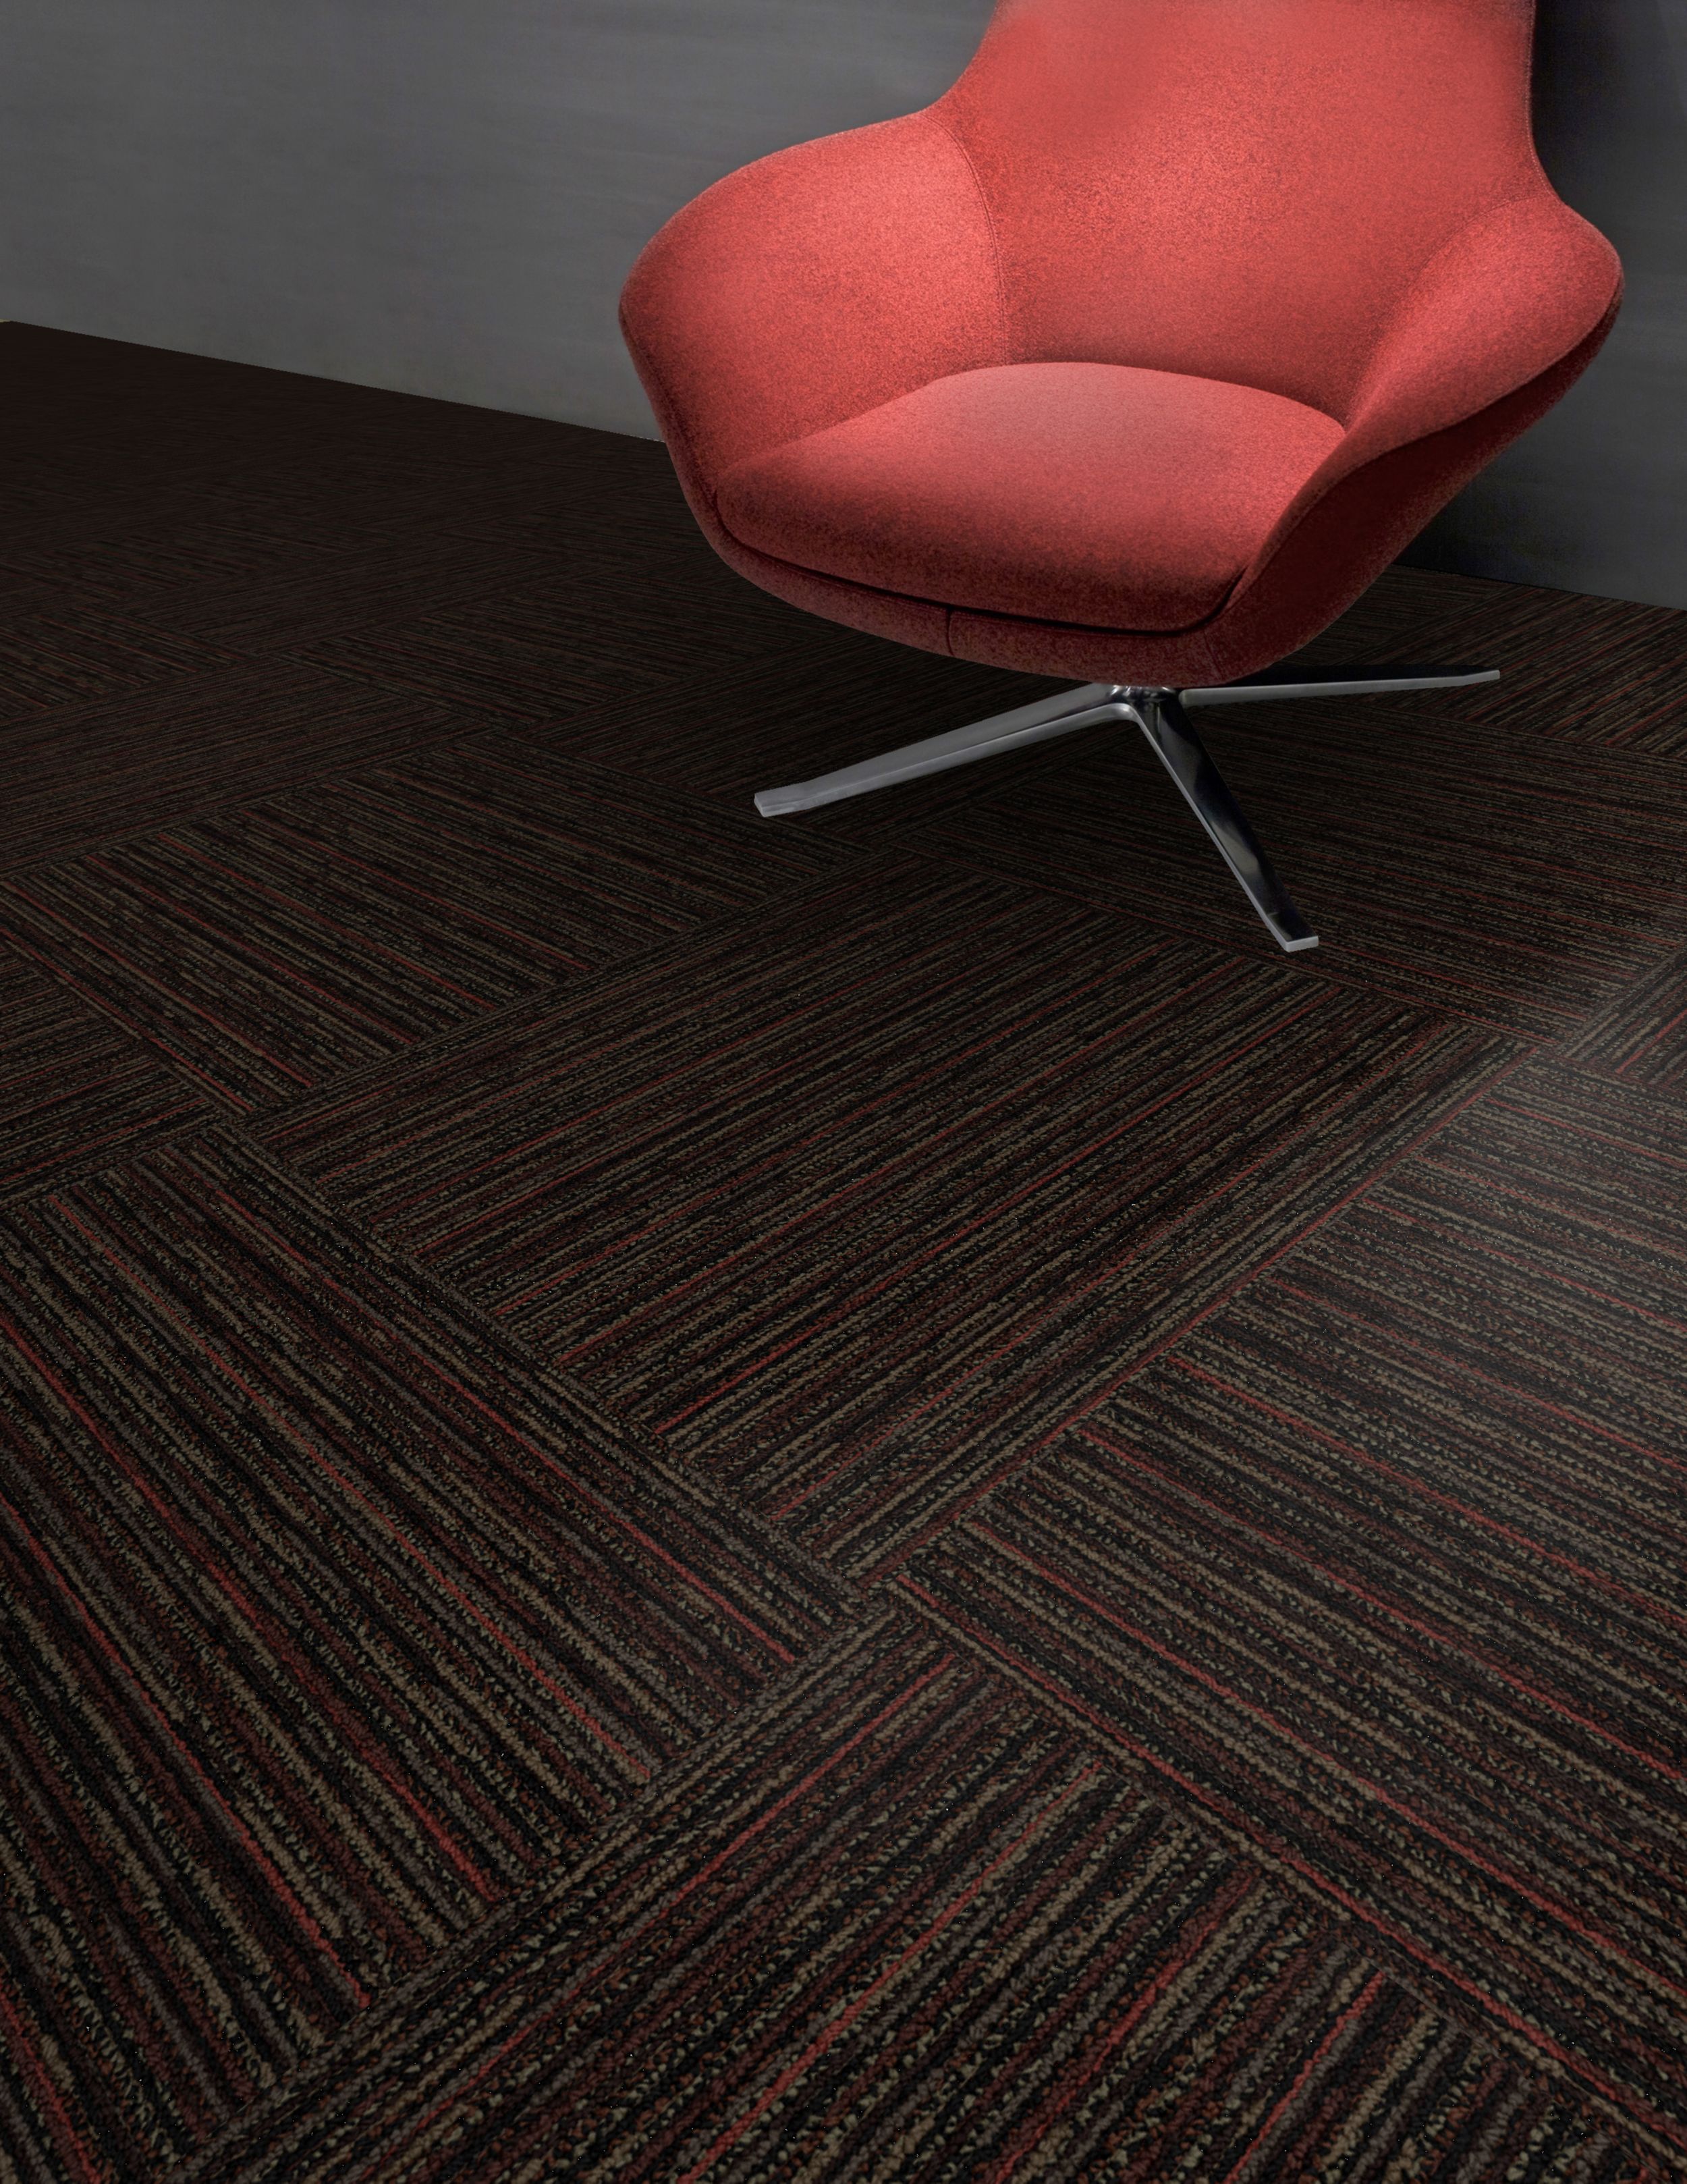 Interface Farmland Loop carpet tile wiith coral colored chair image number 2